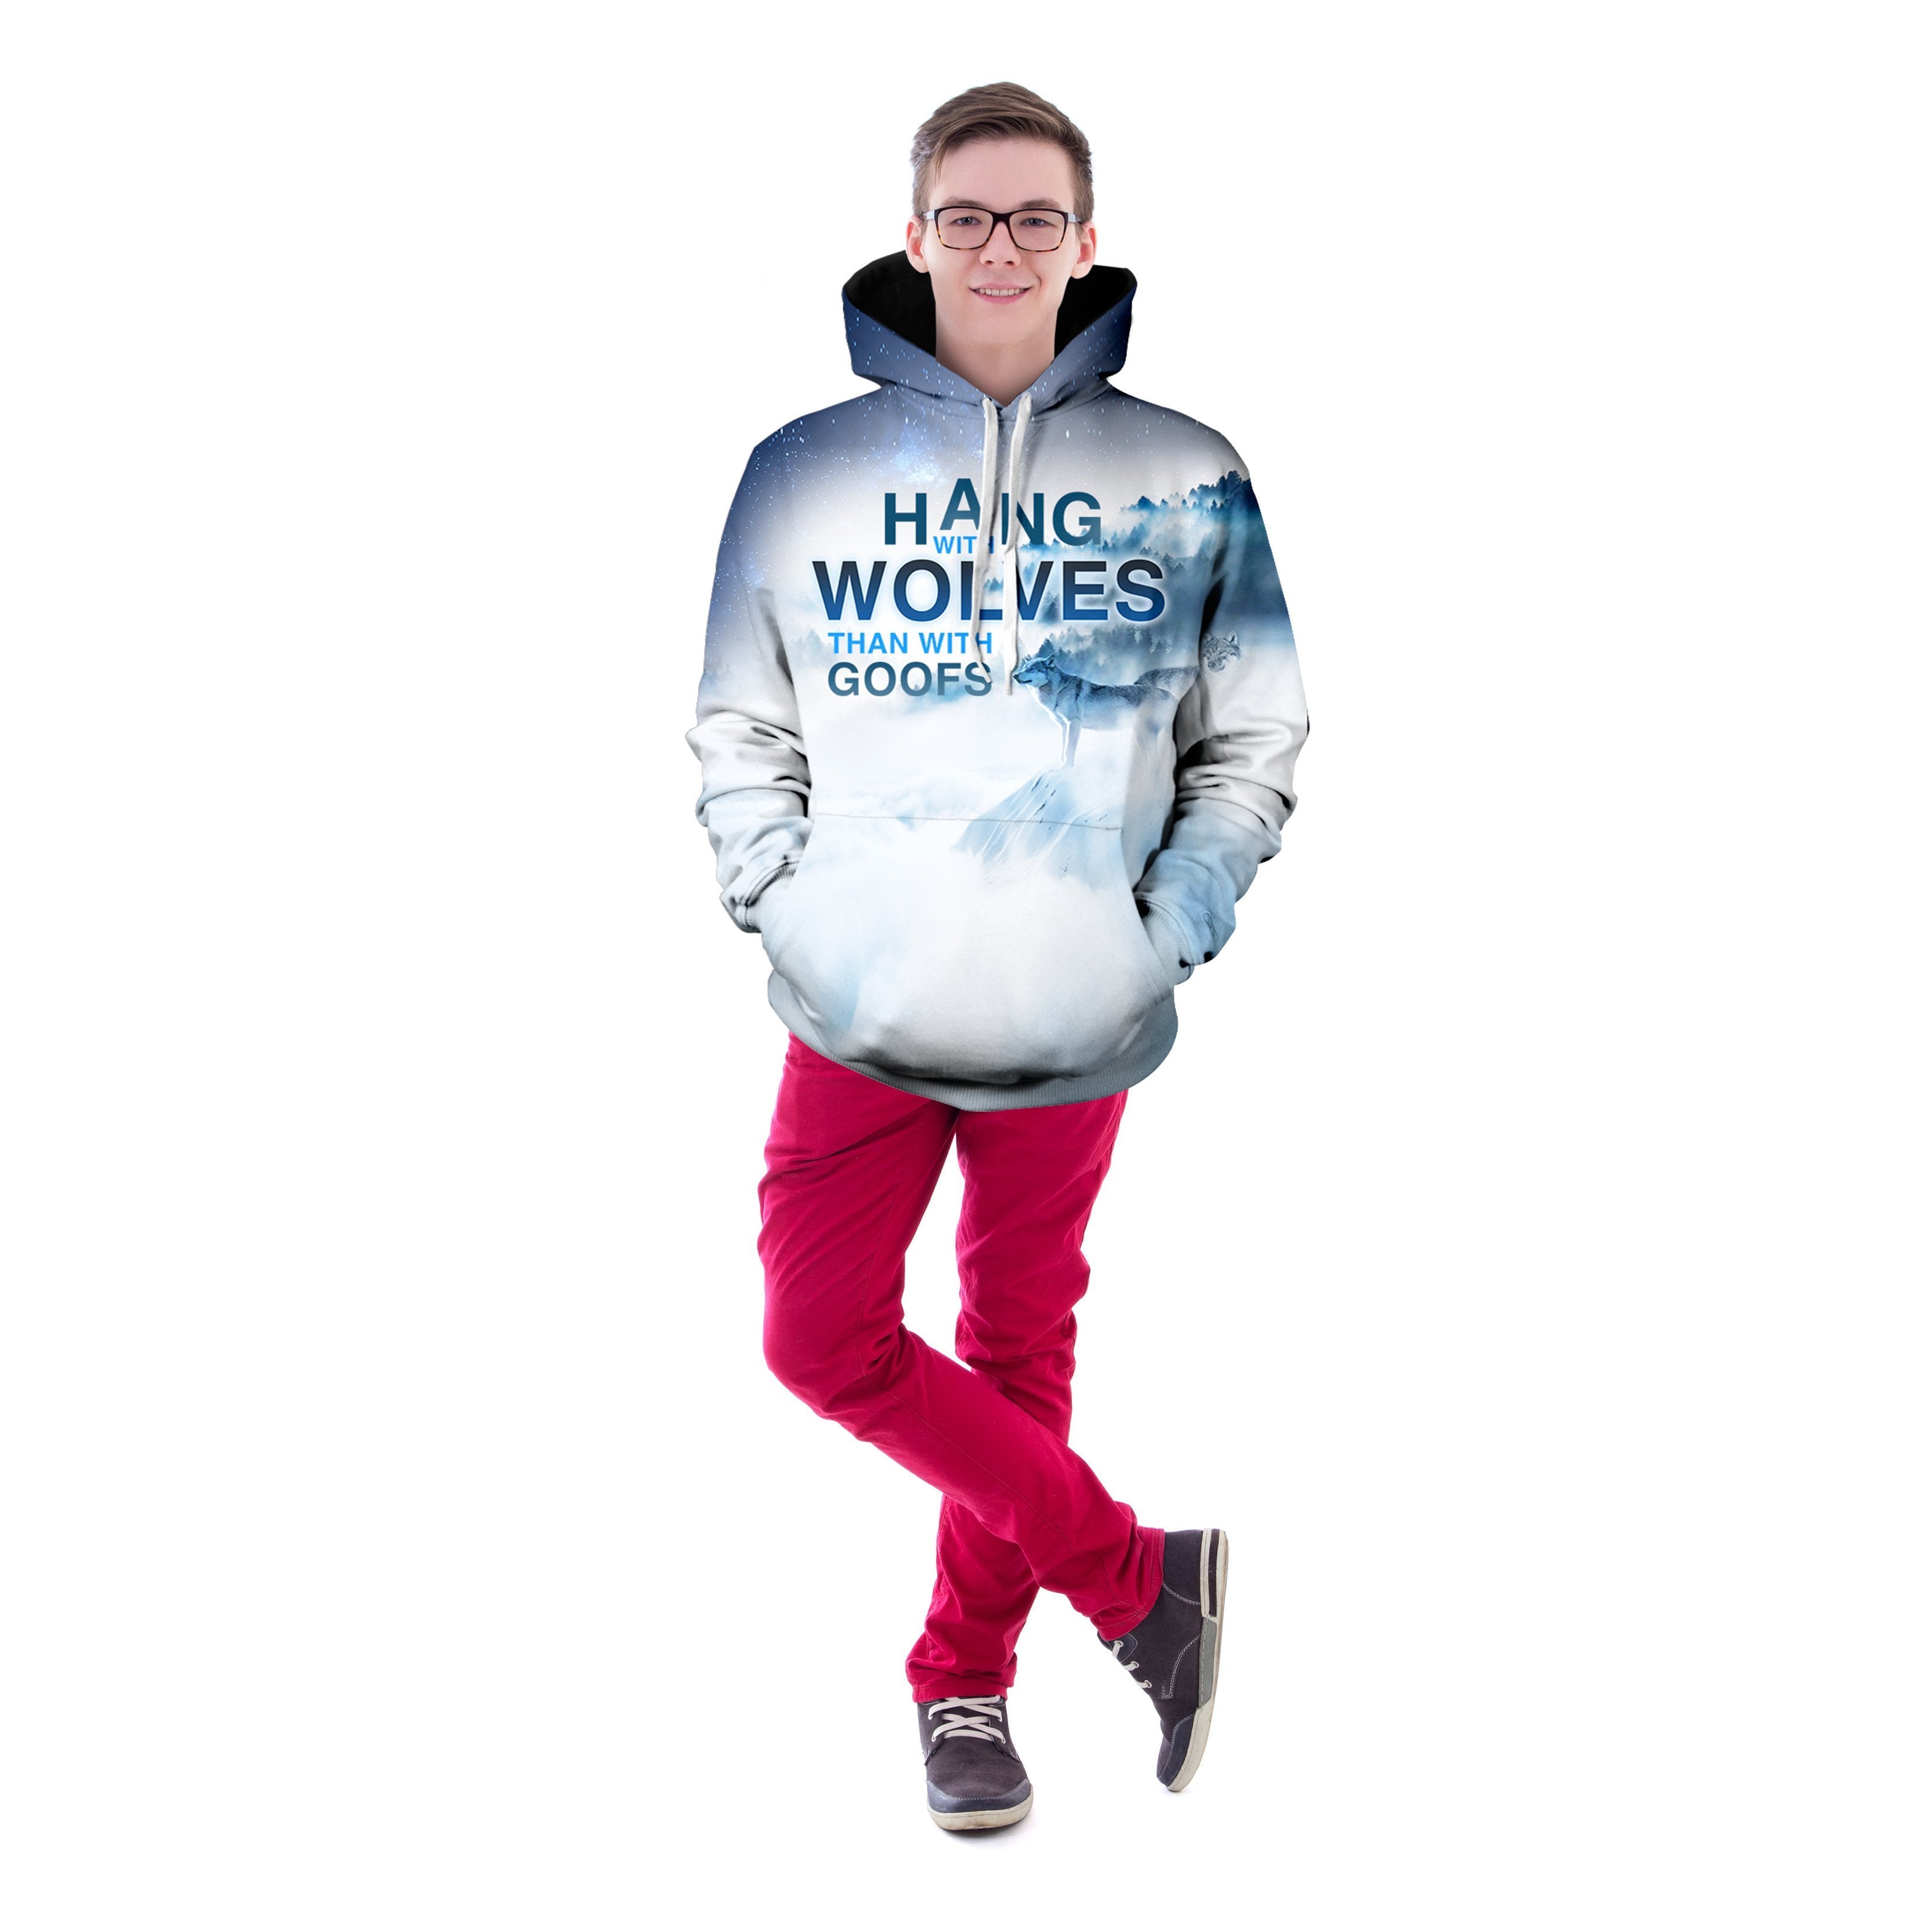 Hang With Wolves Than Goofs Unisex Pullover Hoodie